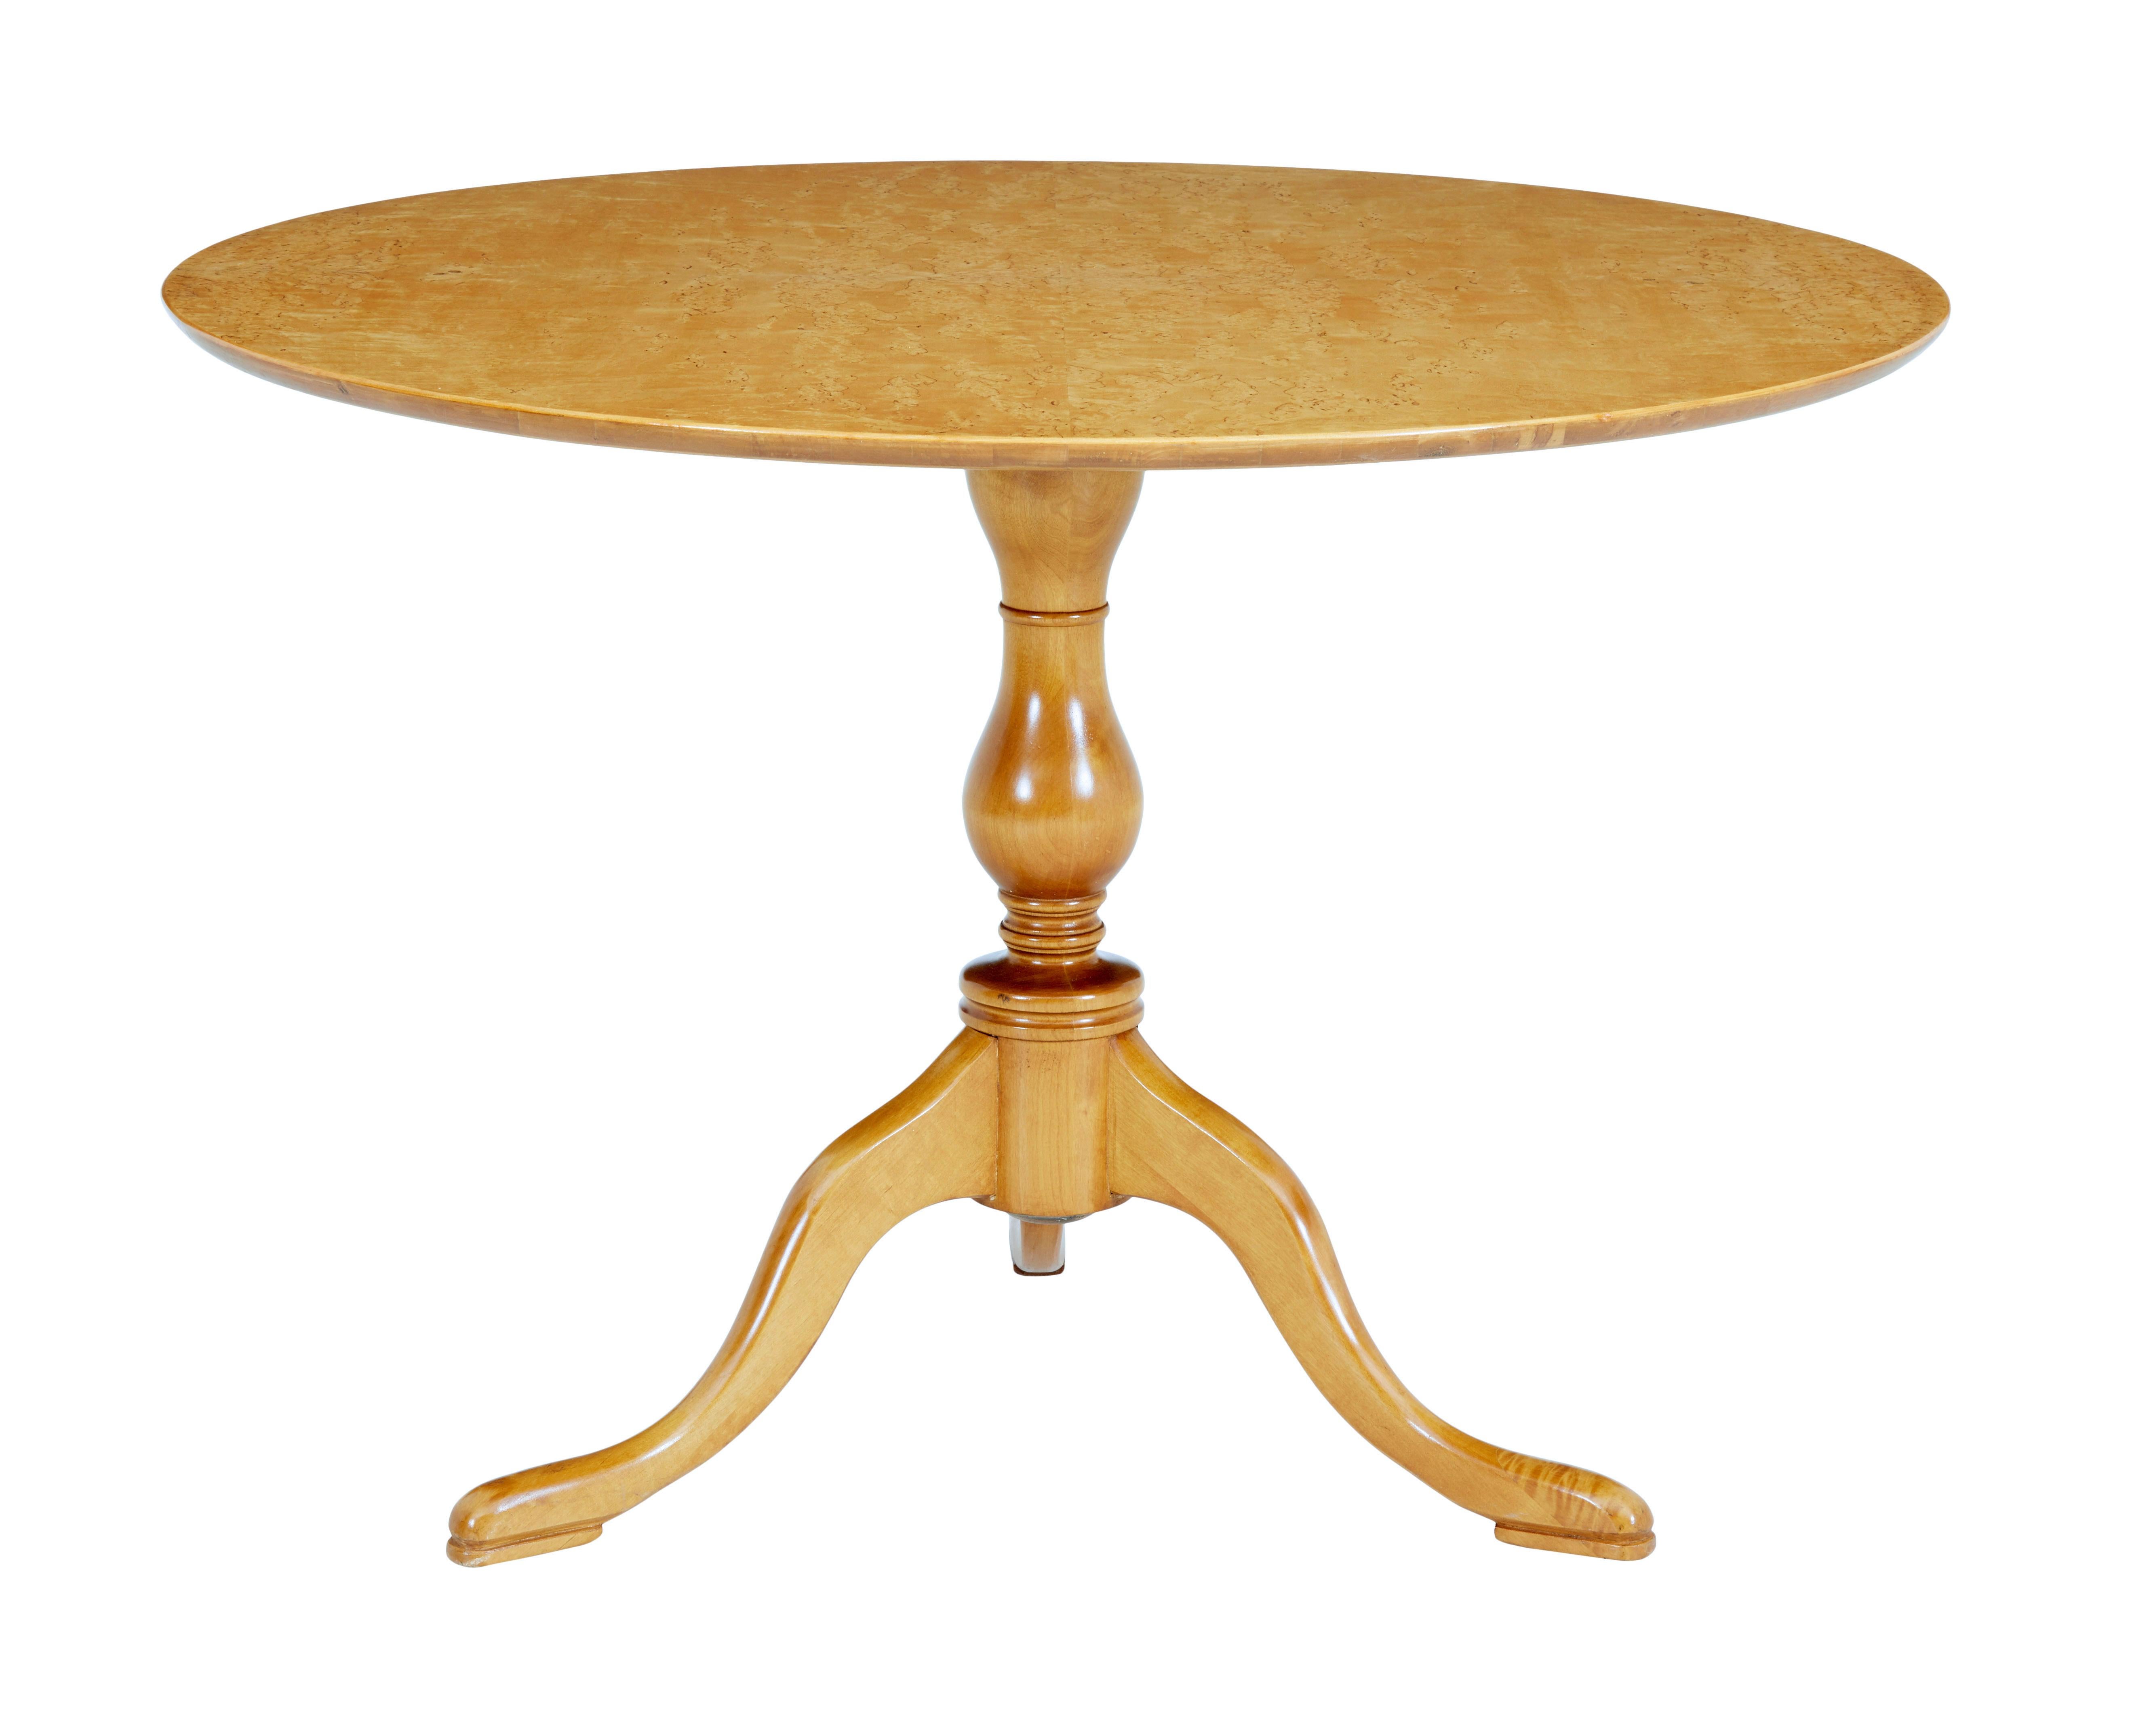 Mid-20th century circular birch occasional table circa 1940.

Fine quality burr birch circular occasional table in the the victorian style. Quarter veneered top surface with burr grain detailing. Turned stem base, standing on 3 legs and pad